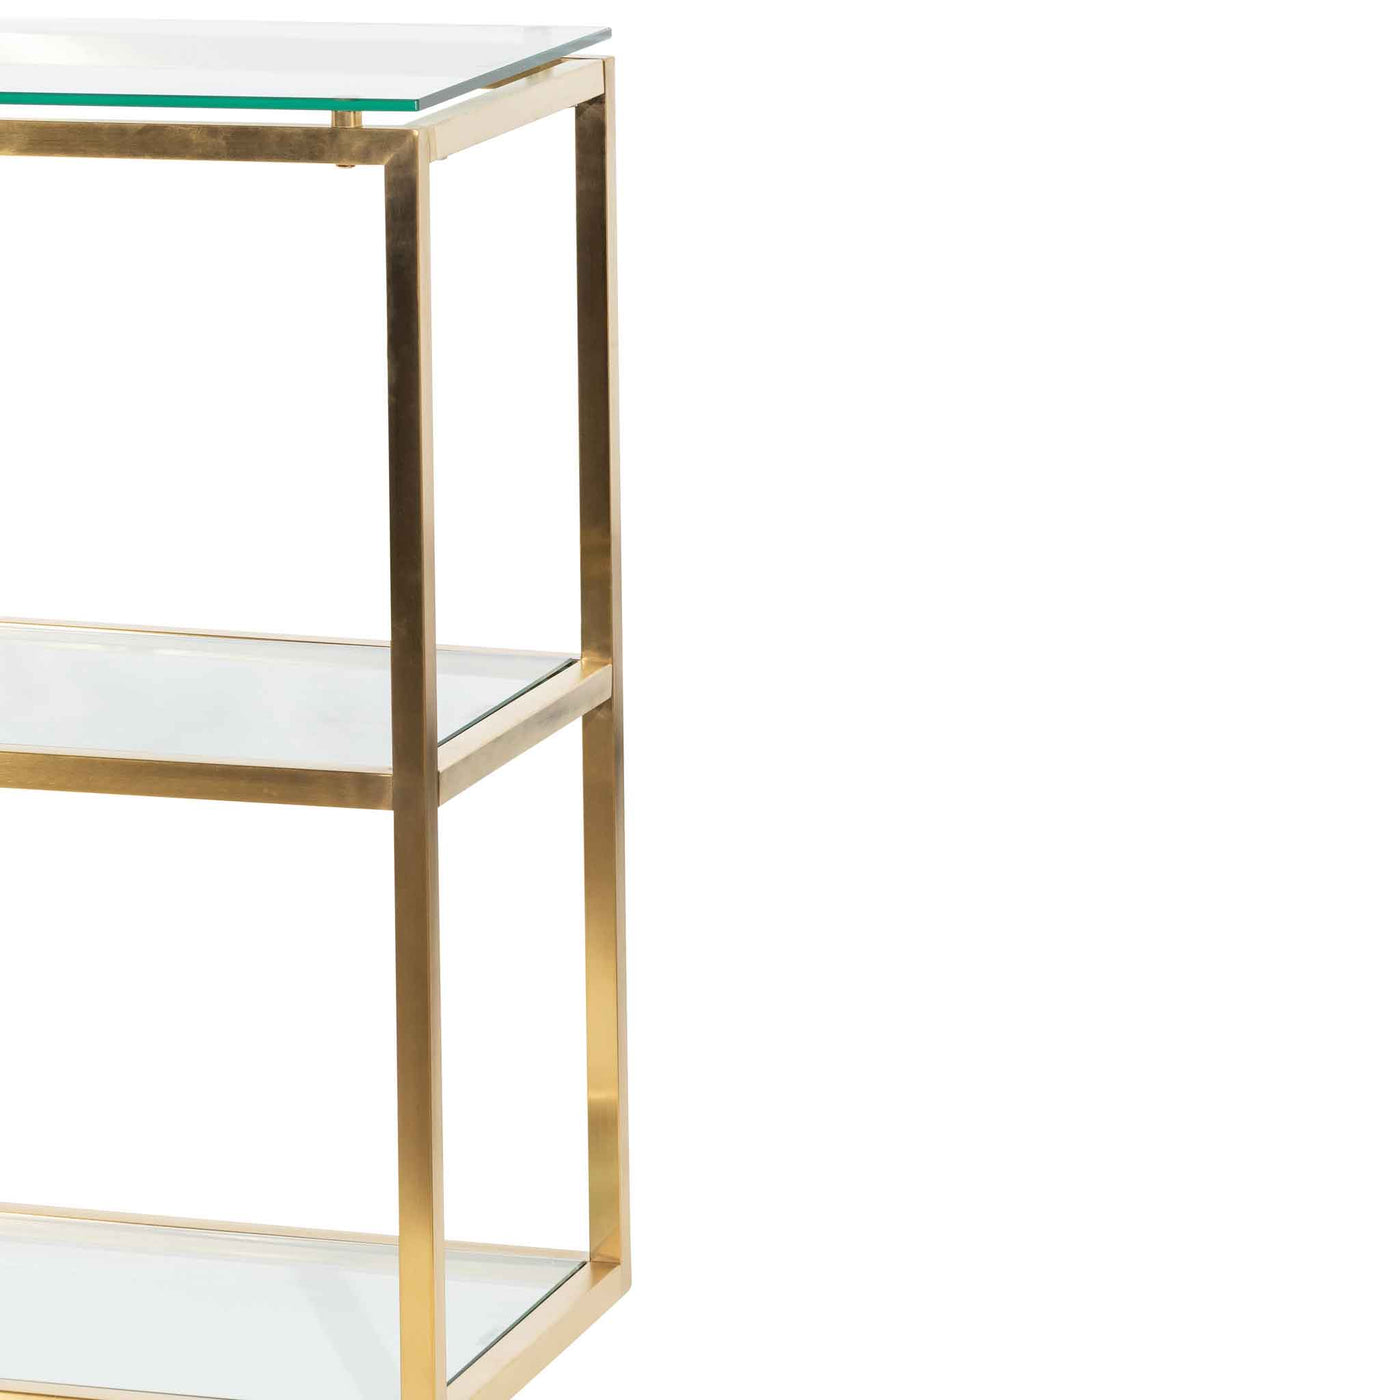 1.4m Glass Console Table - Brushed Gold Base